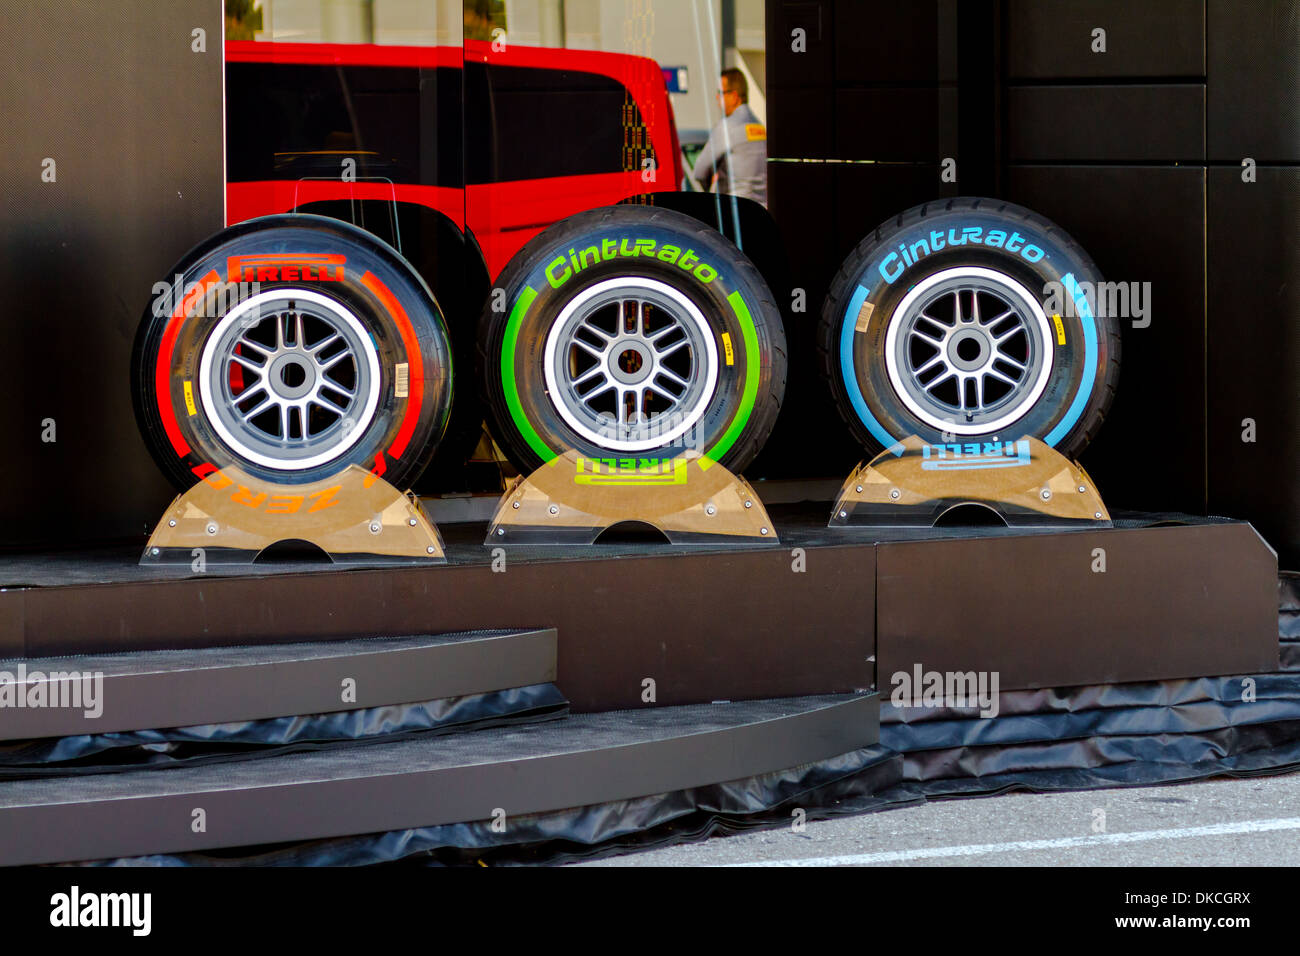 Exposition of the several sets of pneumatic tires Pirelli for the championship of Formula 1 of 2013 Stock Photo